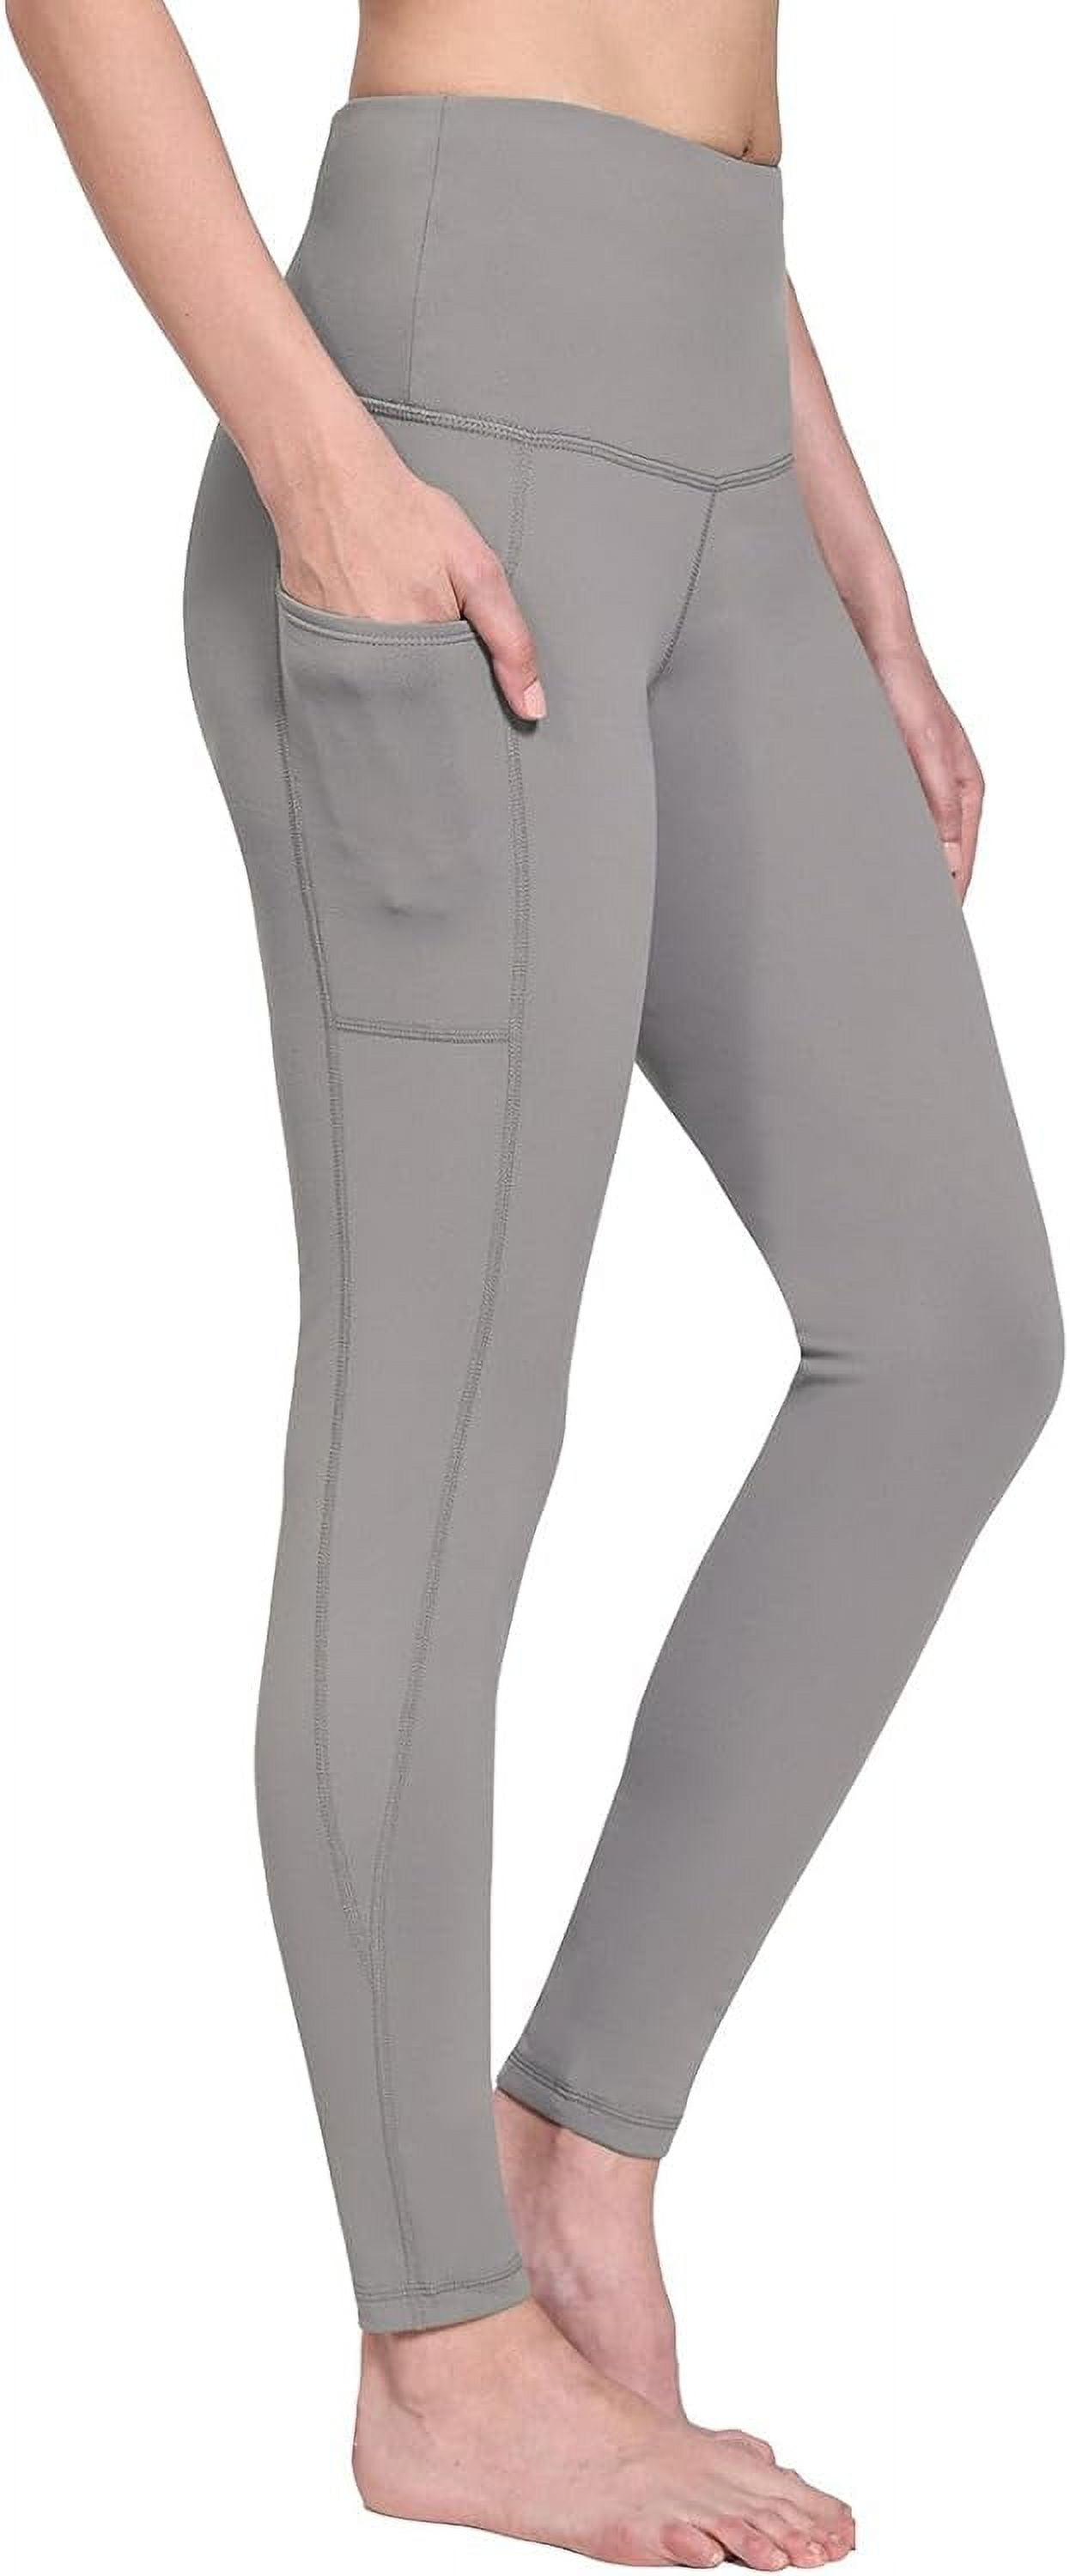 Women's Fleece Lined Leggings Thermal Warm Tights High Waisted Yoga Pants  Cold Weather with Pockets 